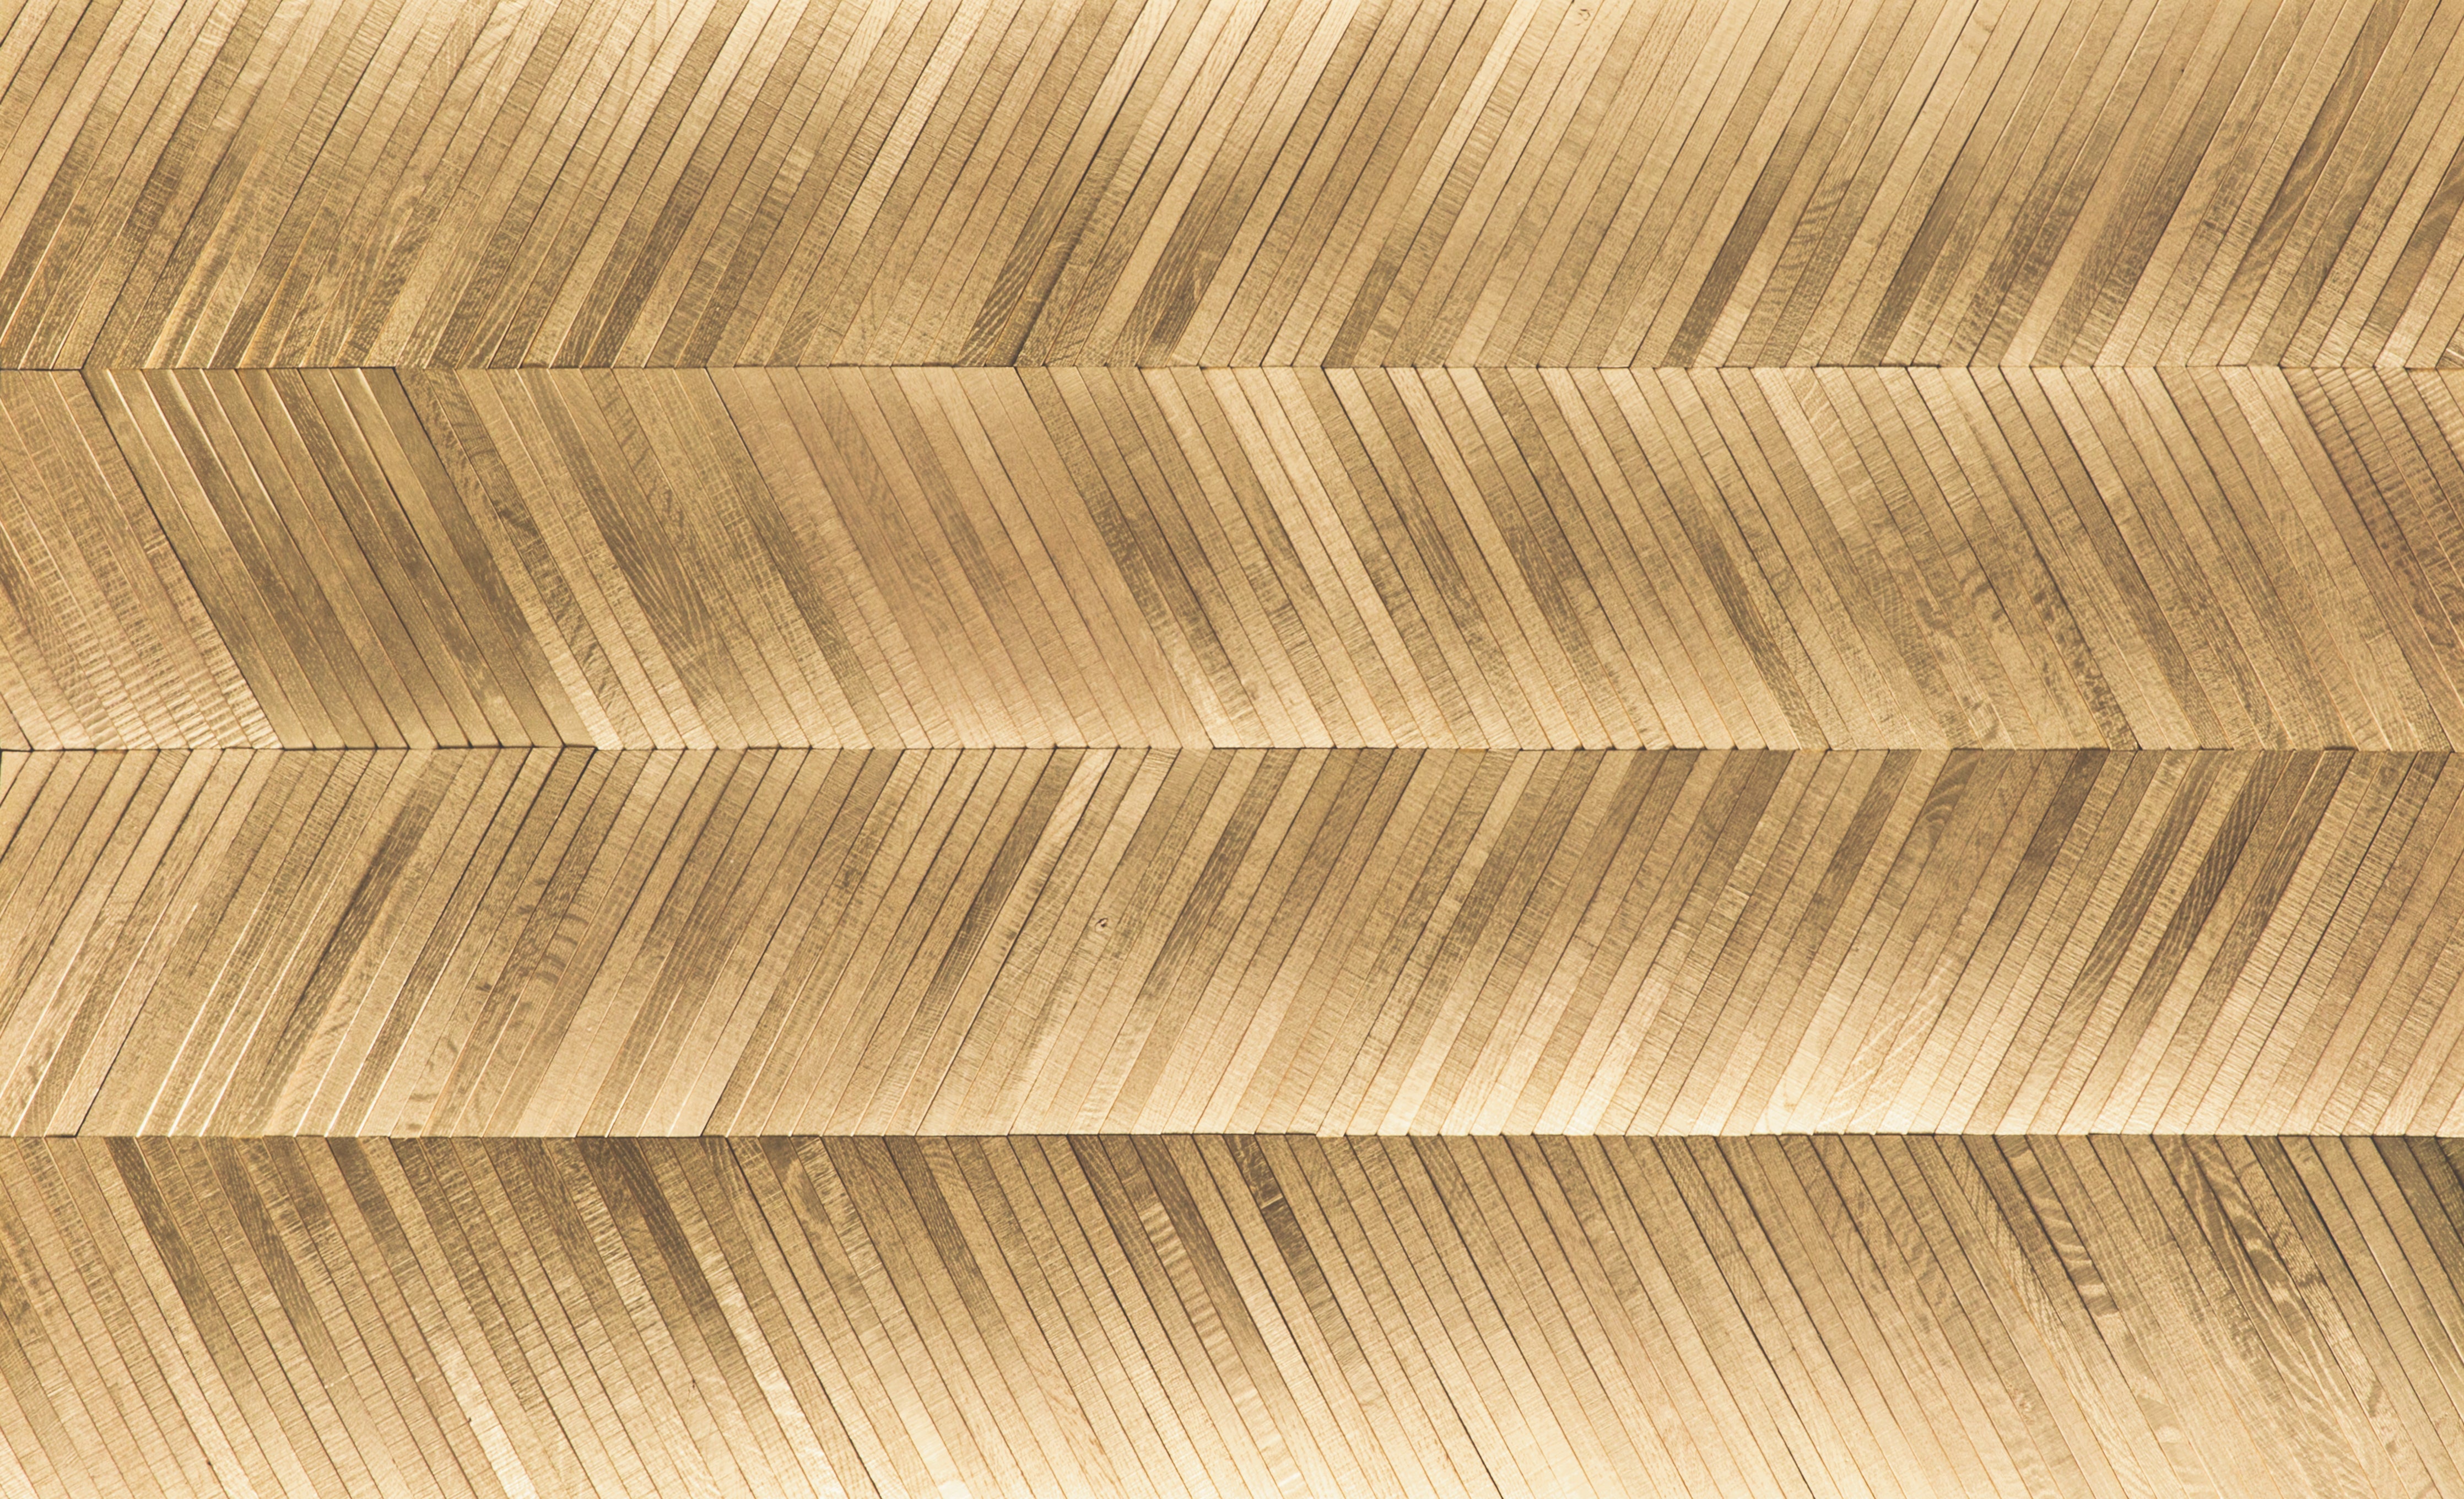 duchateau inceptiv ark chevron gold oak three dimensional wall natural wood panel lacquer for interior use distributed by surface group international